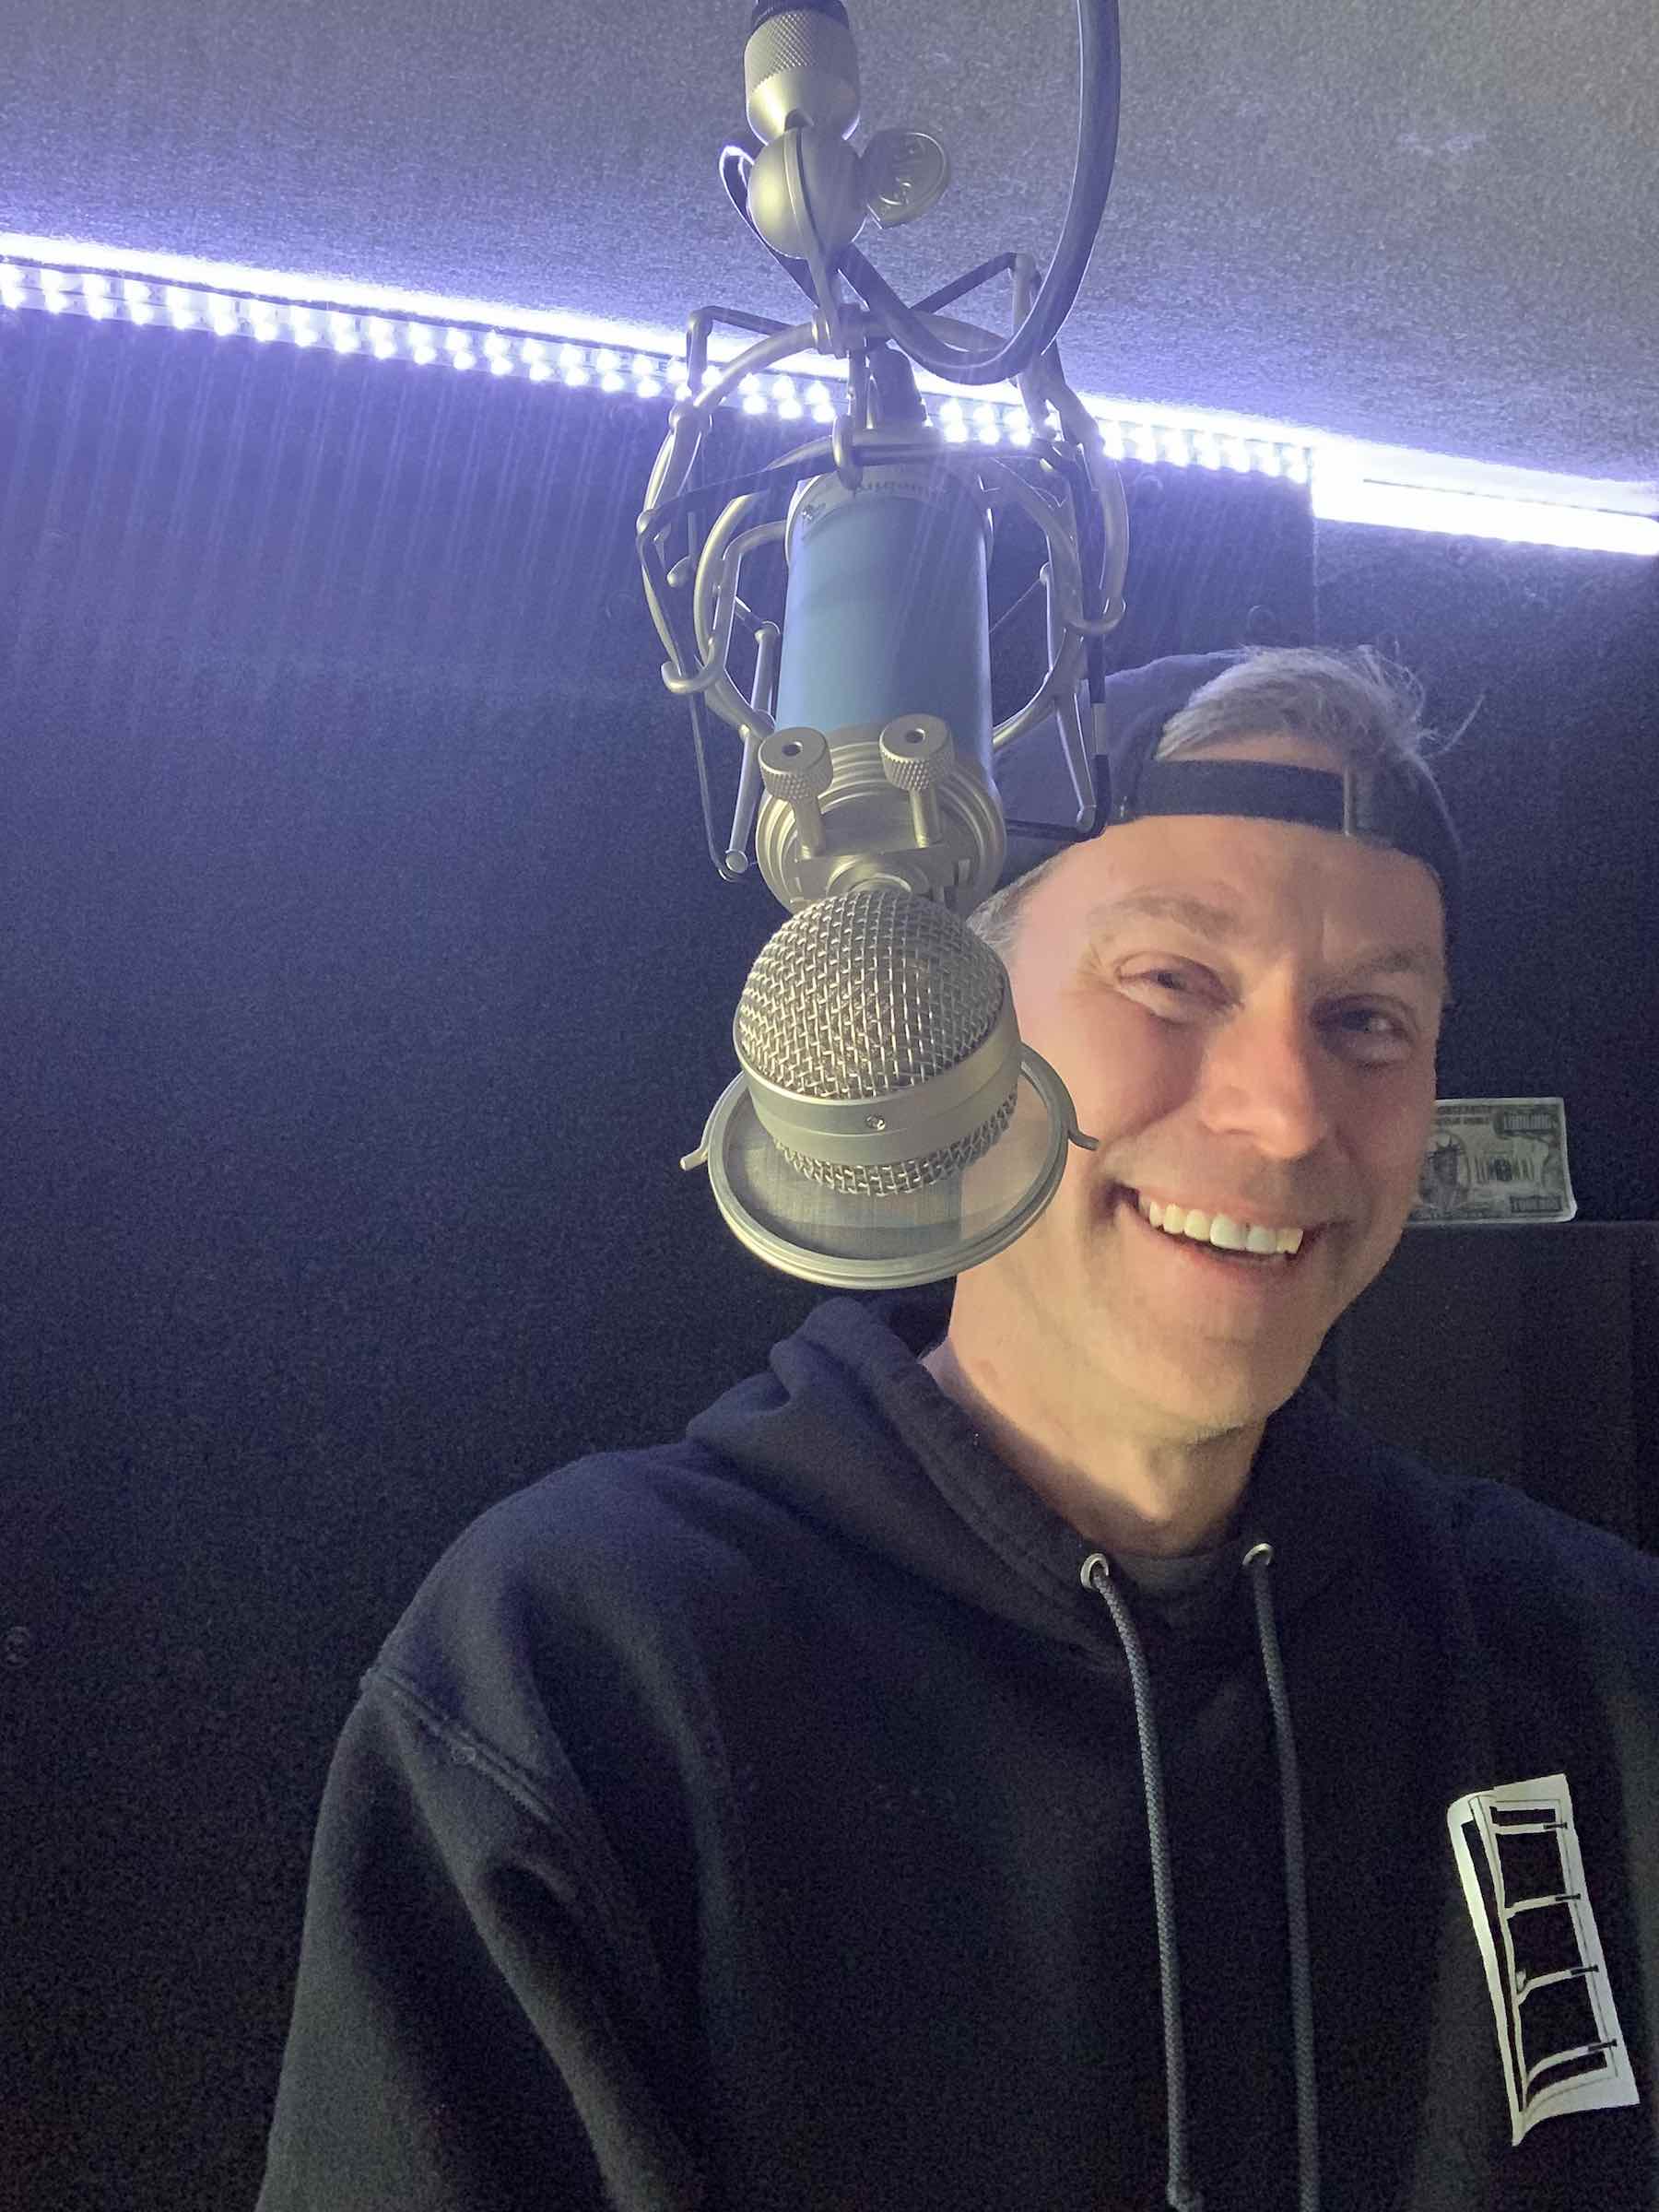 We interview the voice of Hollywood himself, Roy Samuelson. Billions have heard him in action – now we finally get to know the man behind the voice.